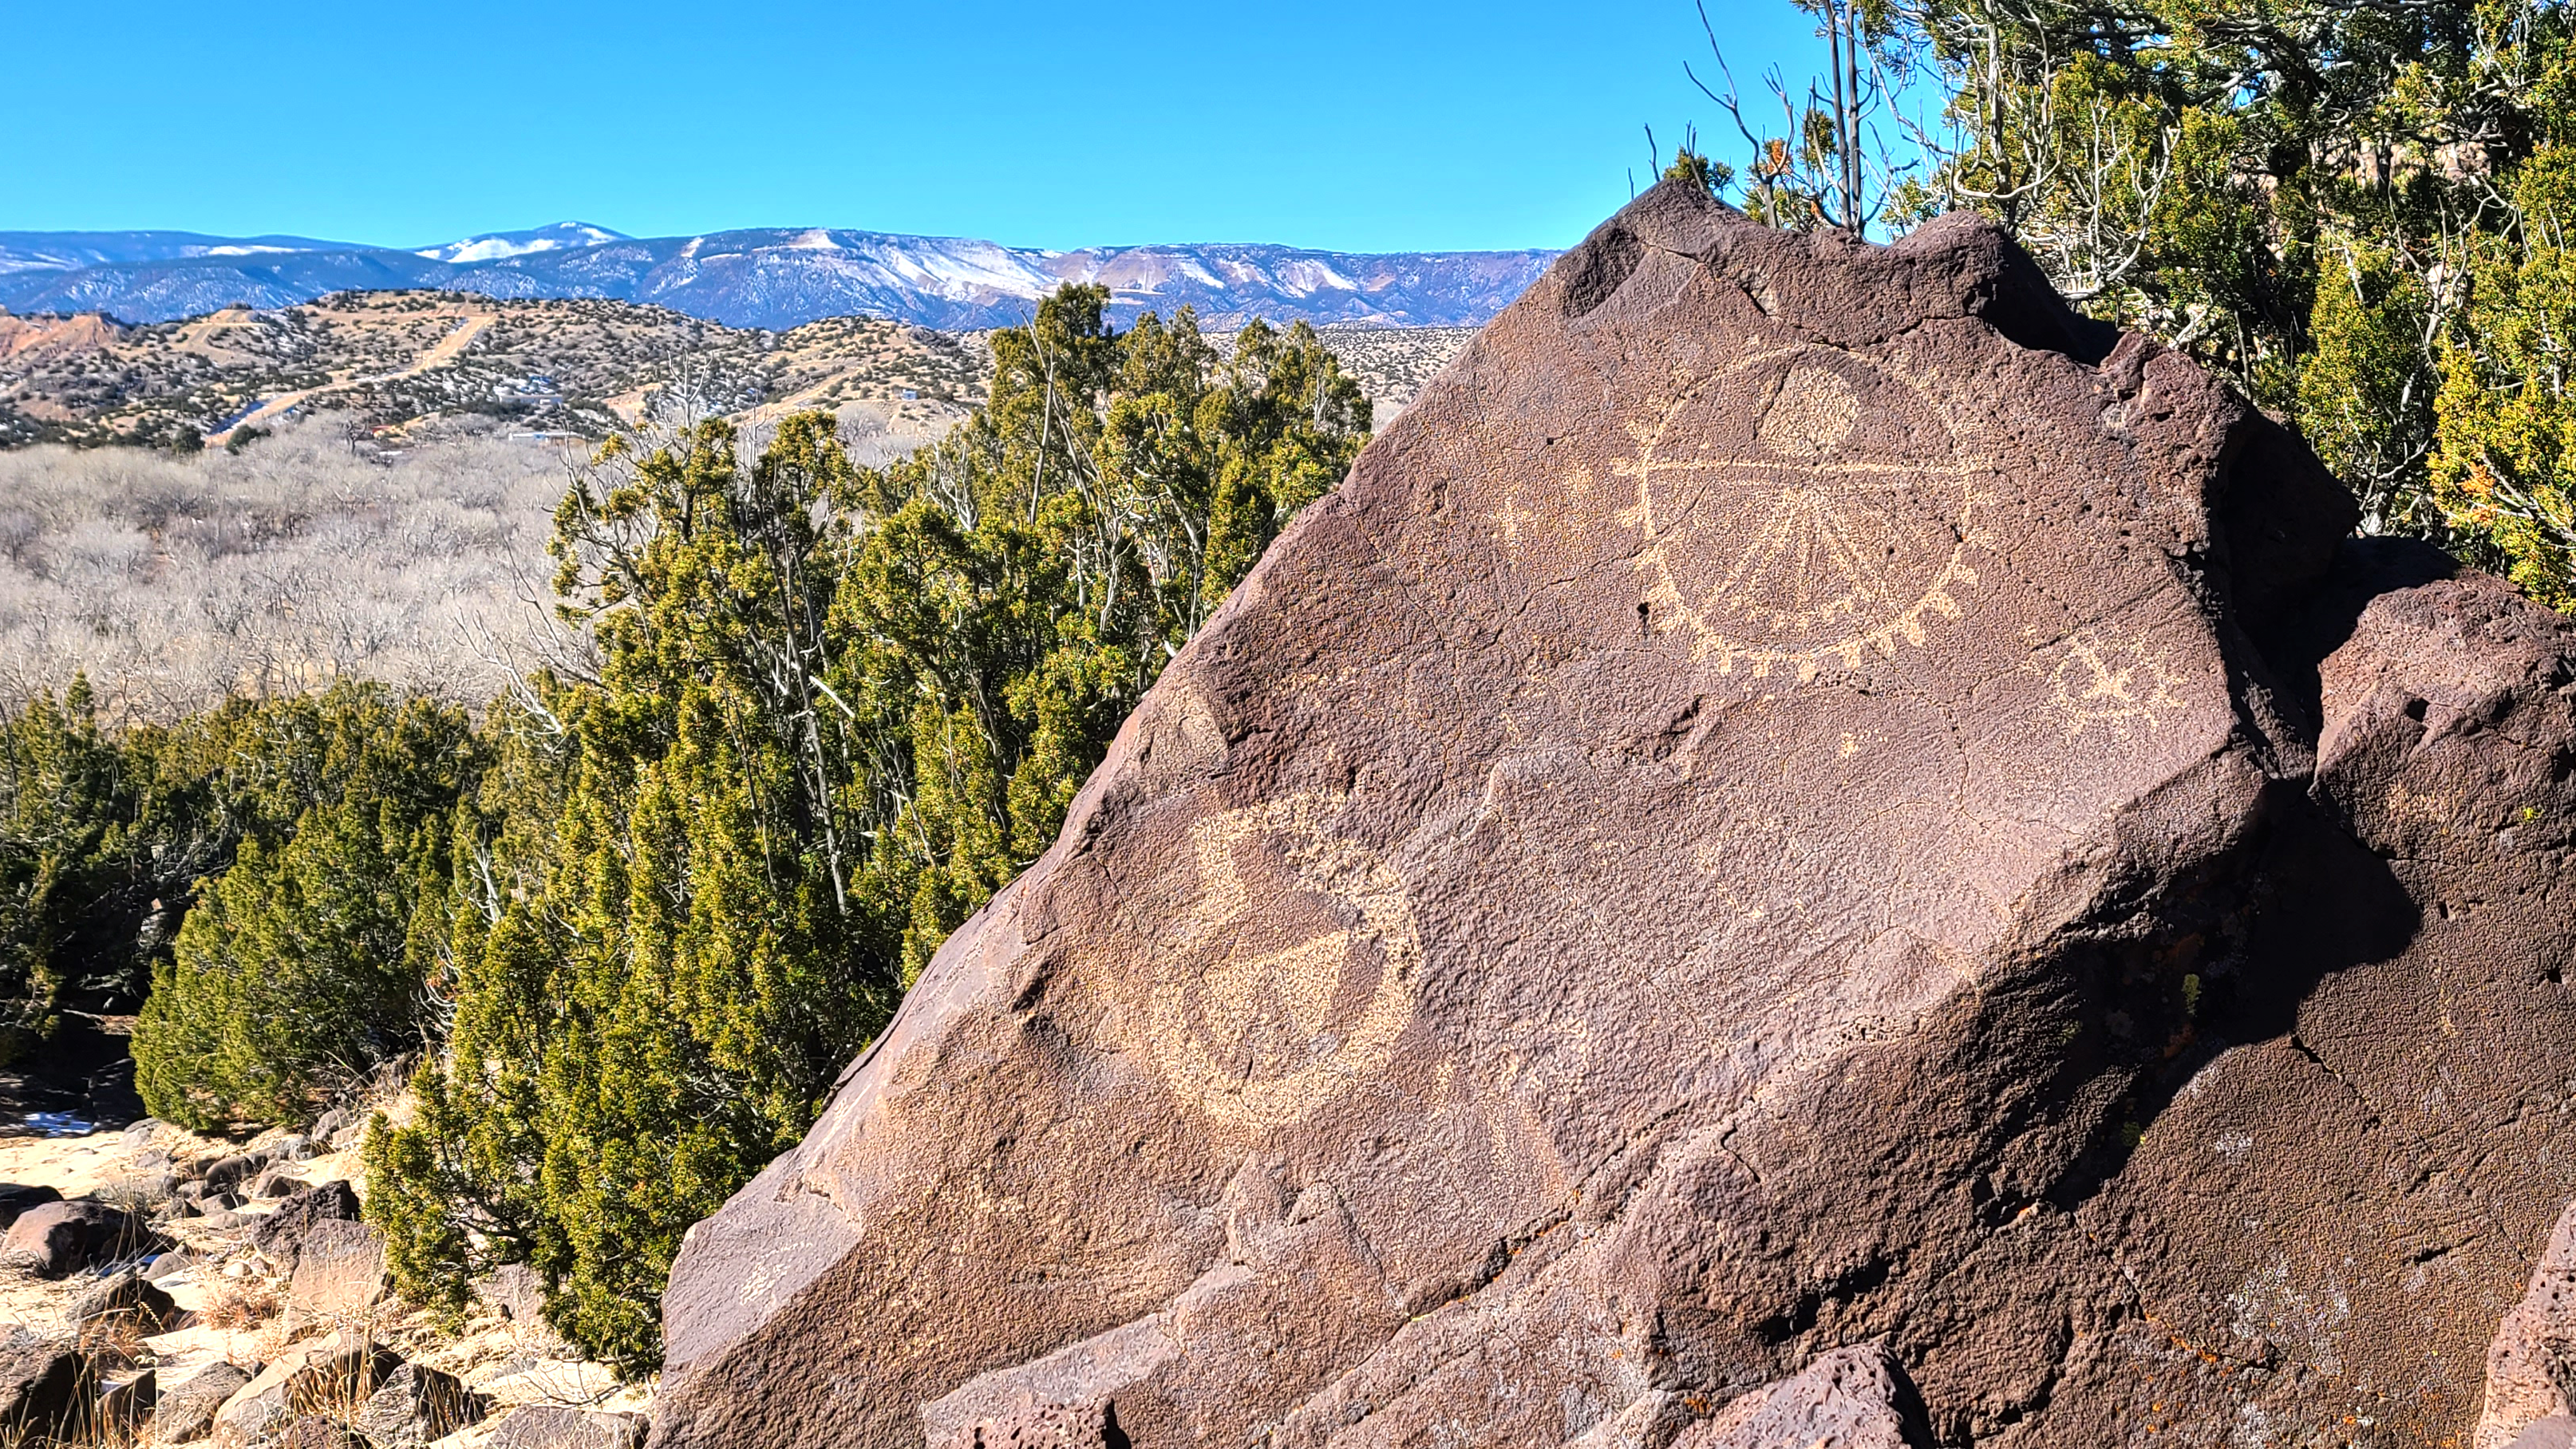 photo showing two shield-like petroglyphs on a large boulder